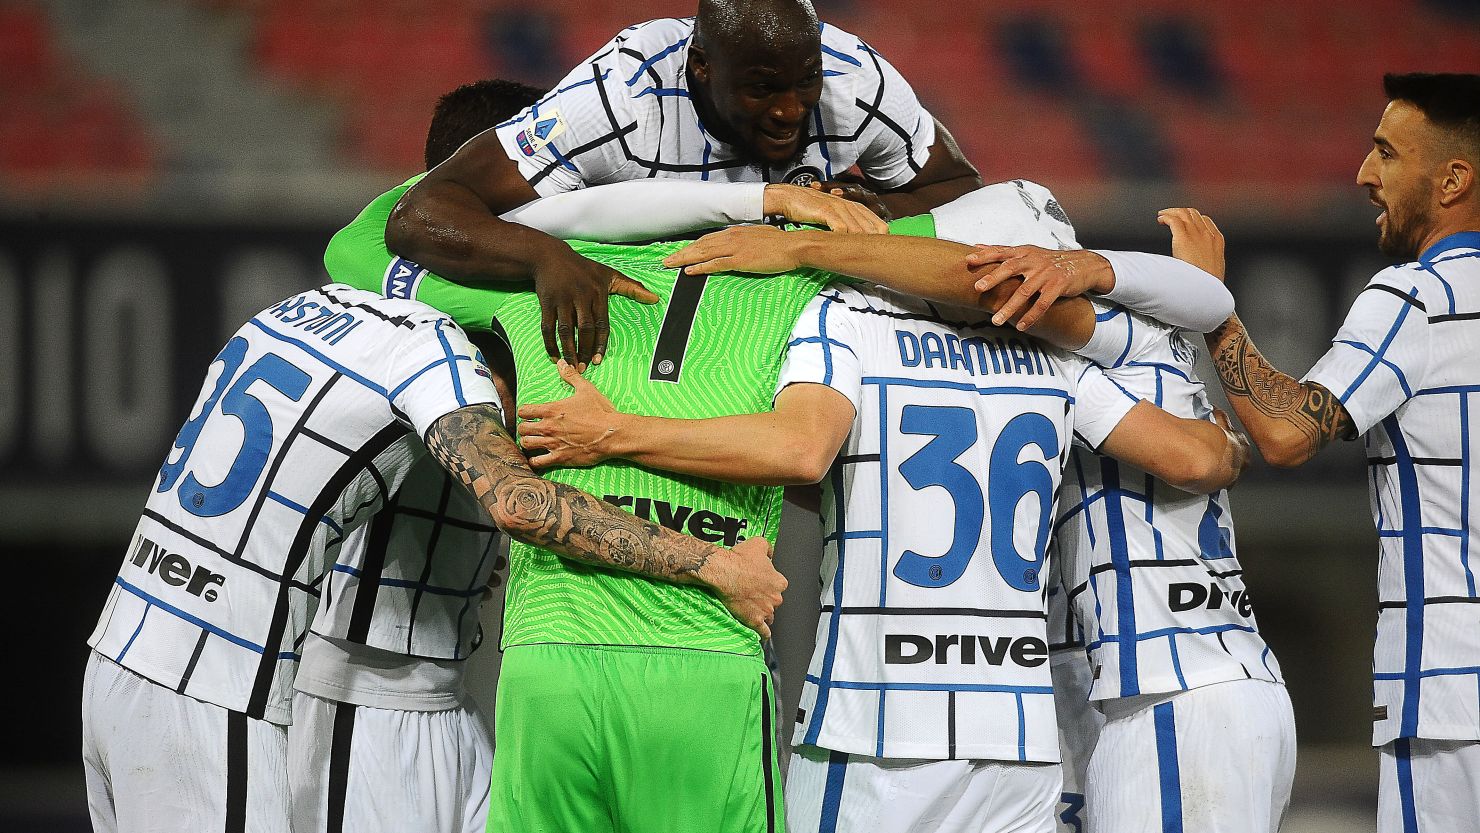 BOLOGNA, ITALY - APRIL 03:  Players of FC Internazionale celebrate at the end of the Serie A match between Bologna FC and FC Internazionale at Stadio Renato Dall'Ara on April 03, 2021 in Bologna, Italy. (Photo by Mario Carlini / Iguana Press/Getty Images)